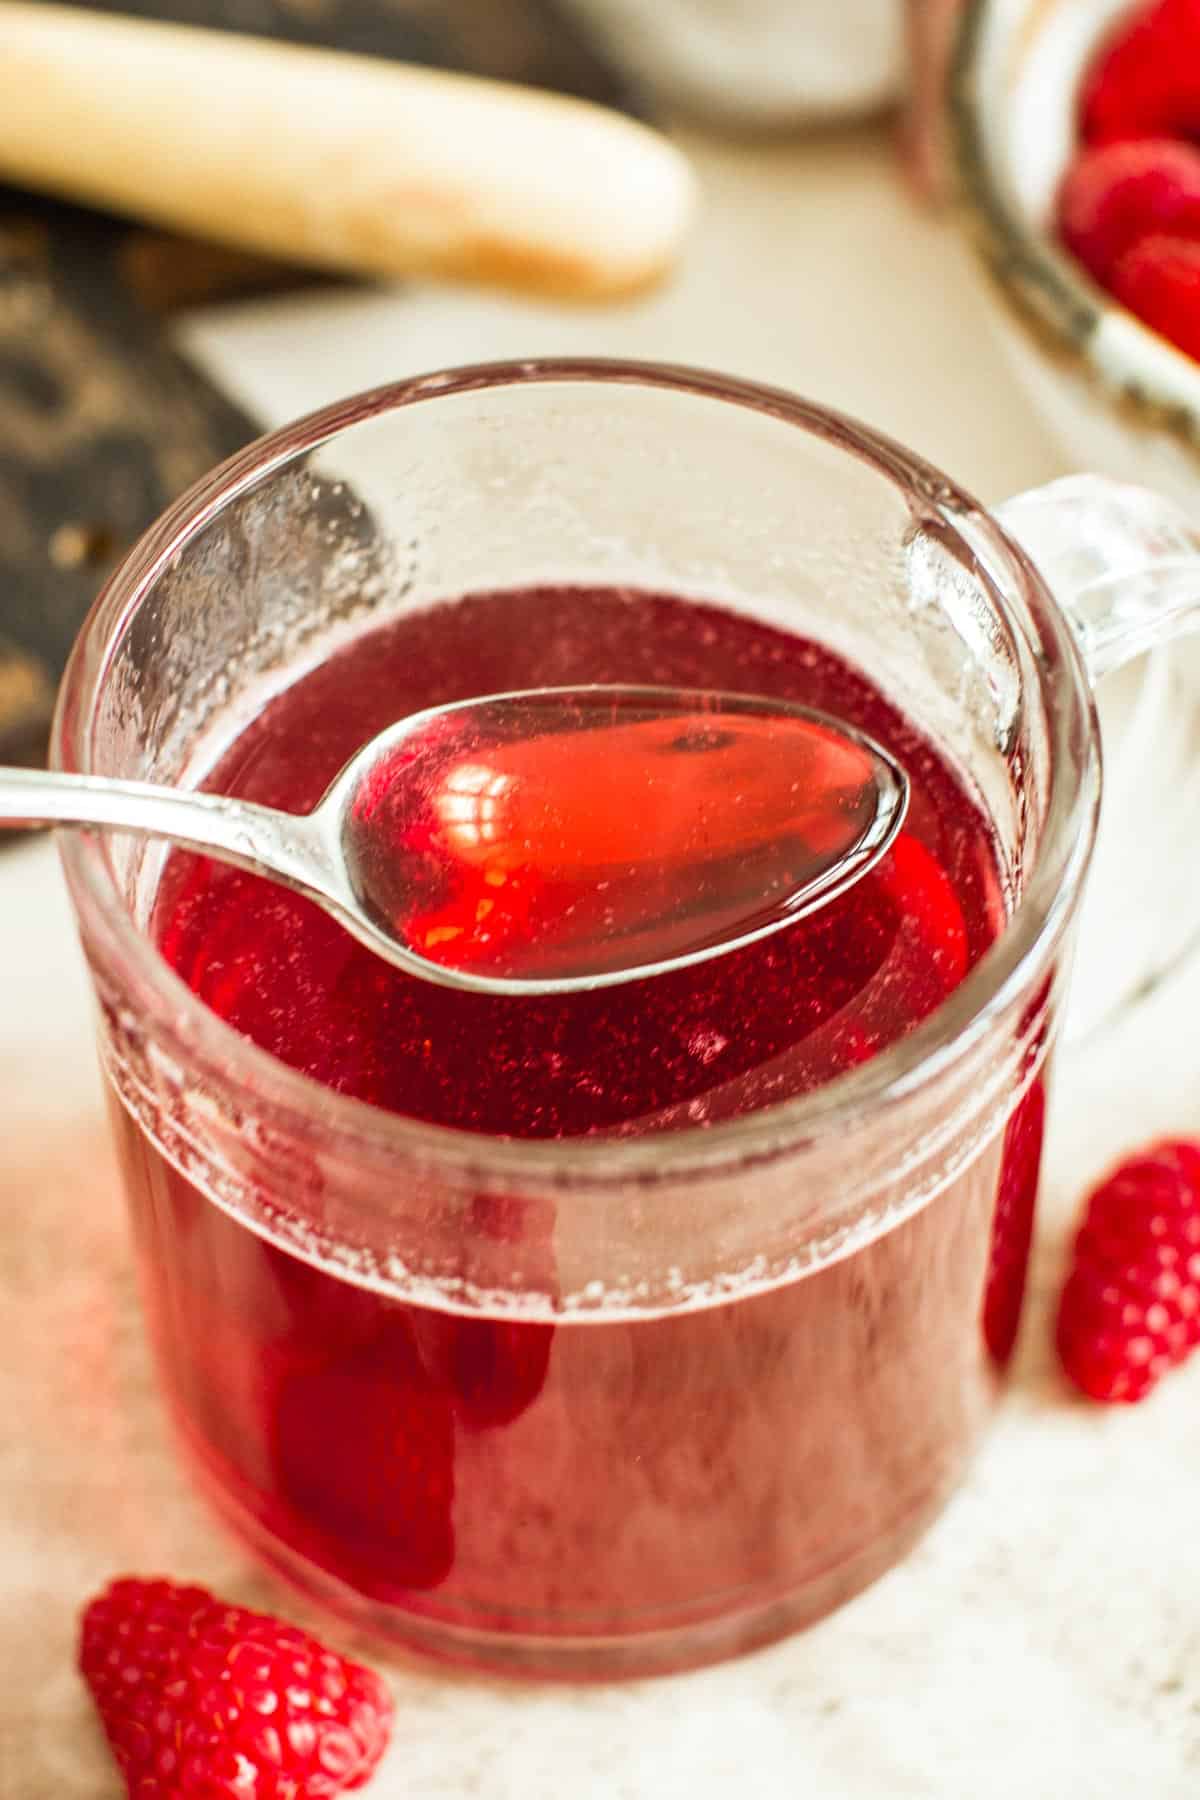 Spoonful of raspberry simple syrup over a glass.